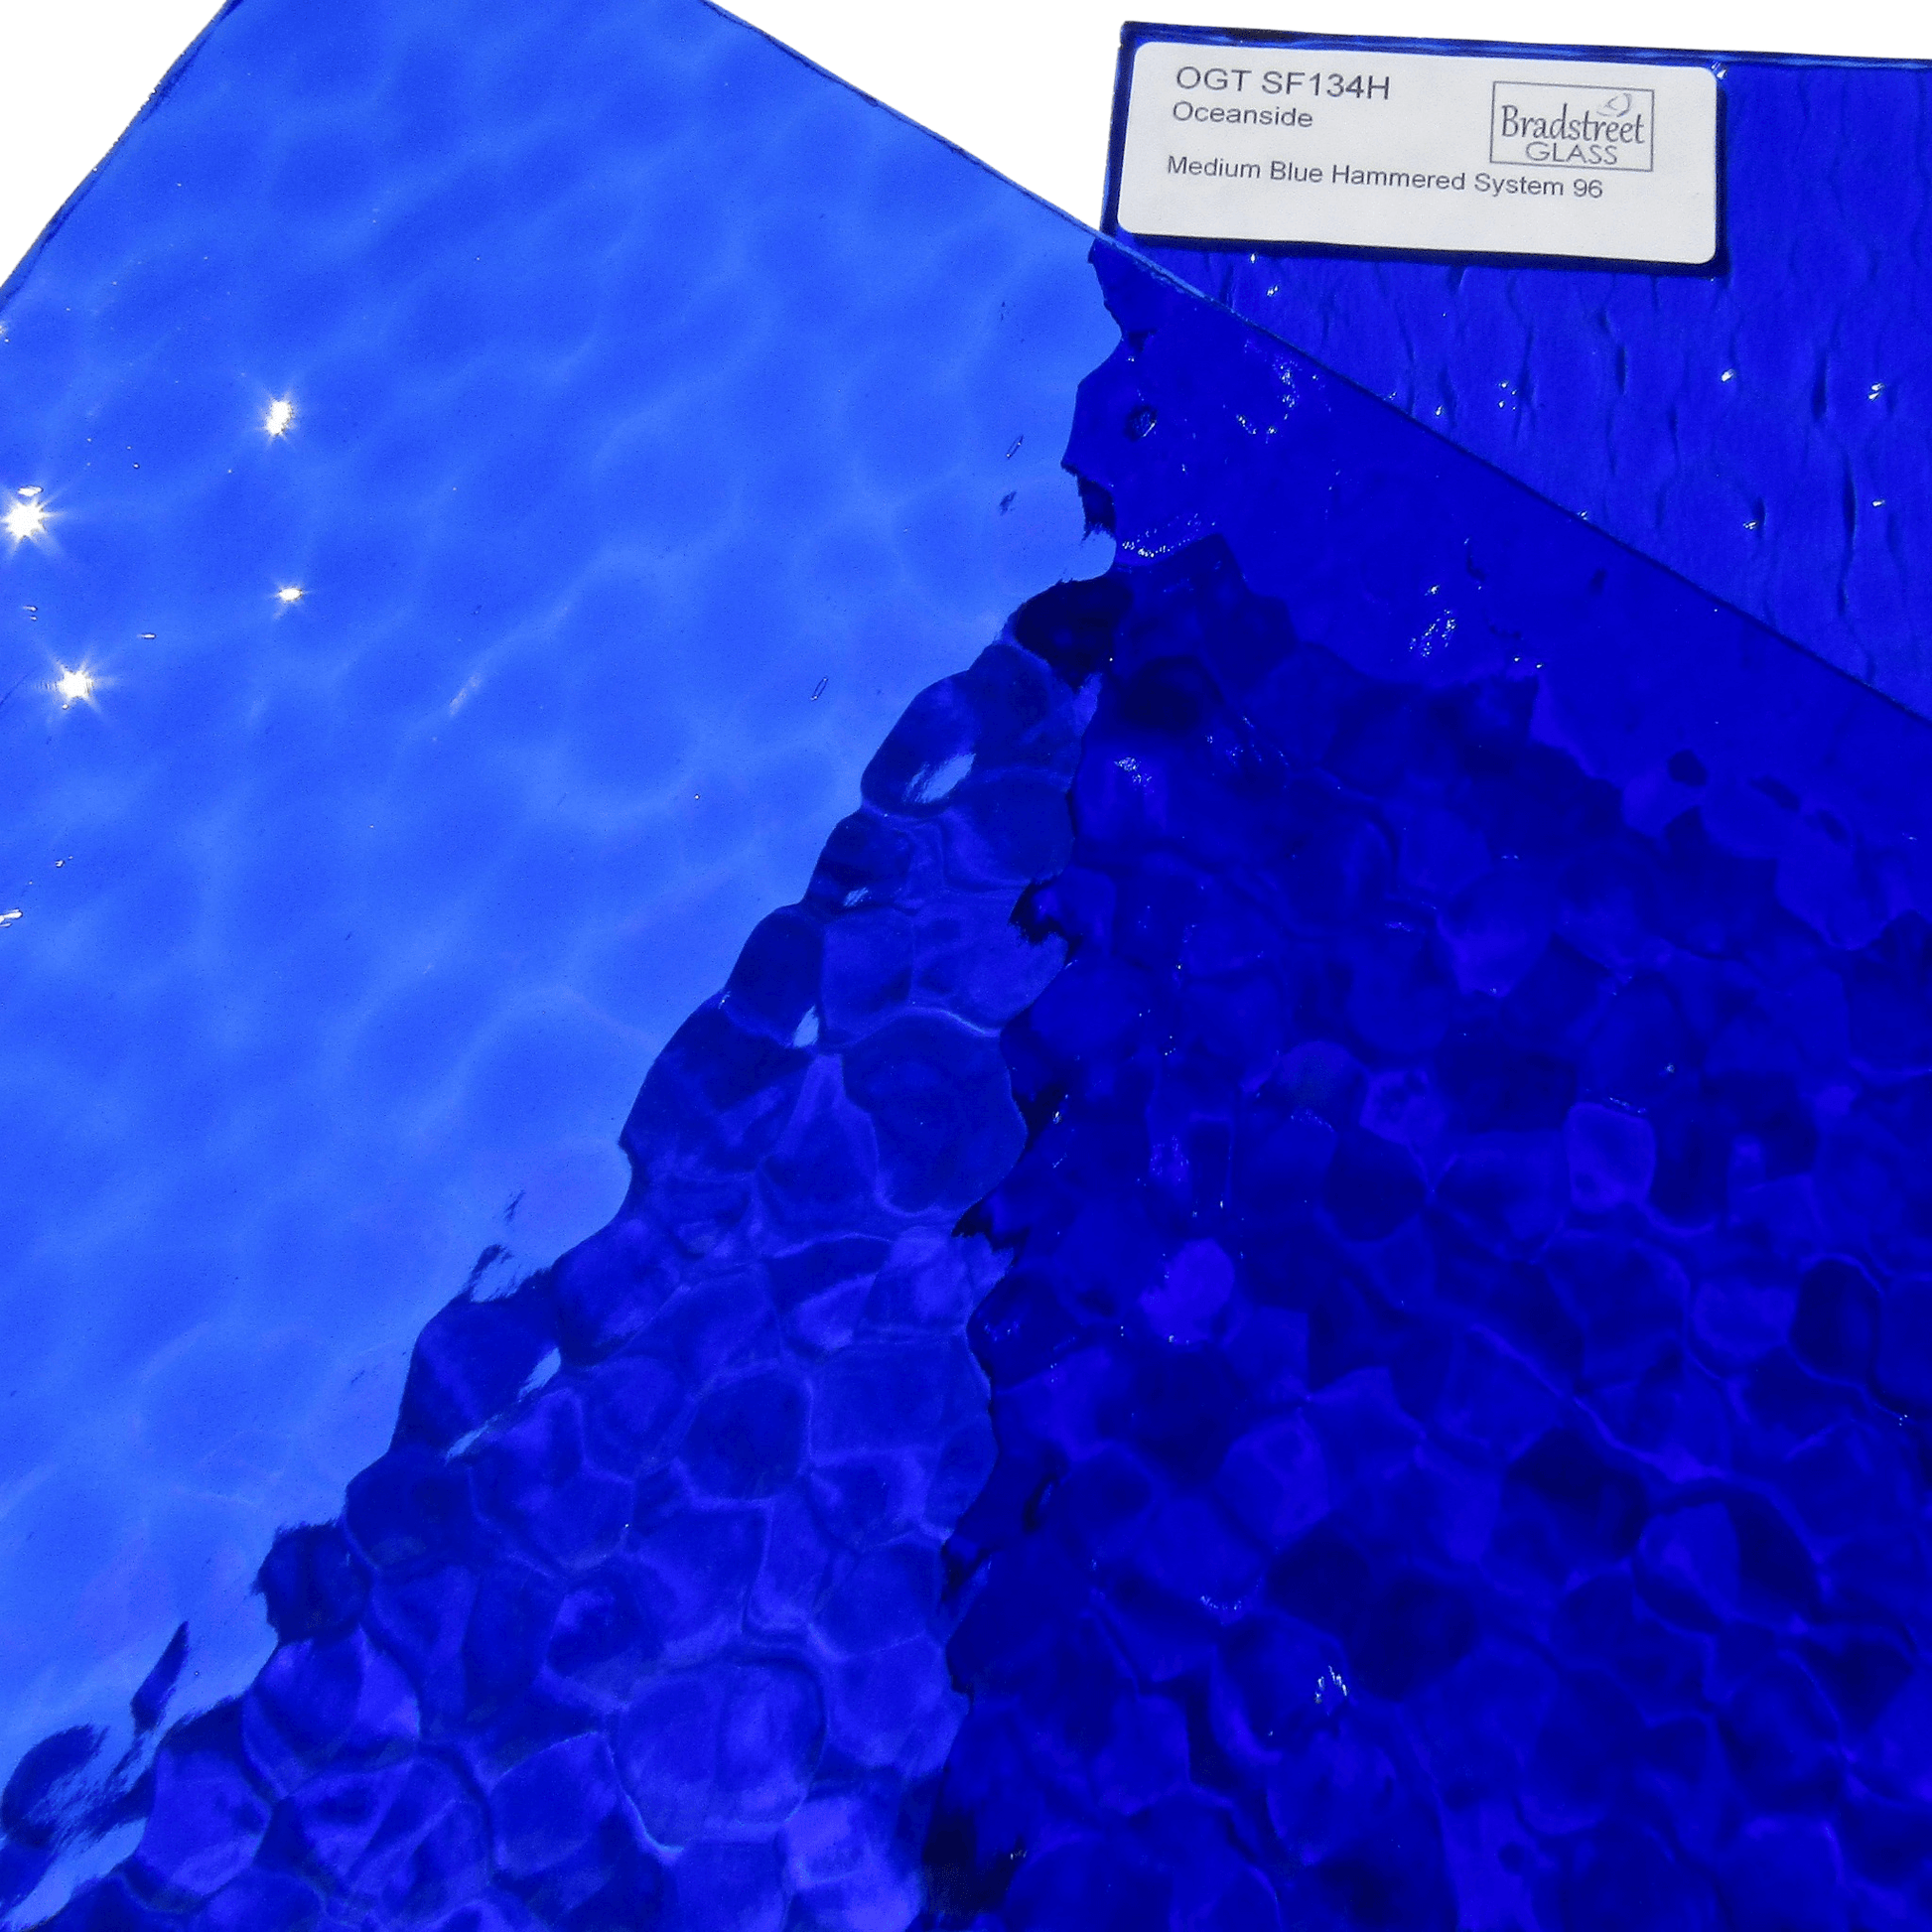 Medium Blue Hammered Stained Glass Sheet 96 COE Fusible Oceanside Spectrum SF134H